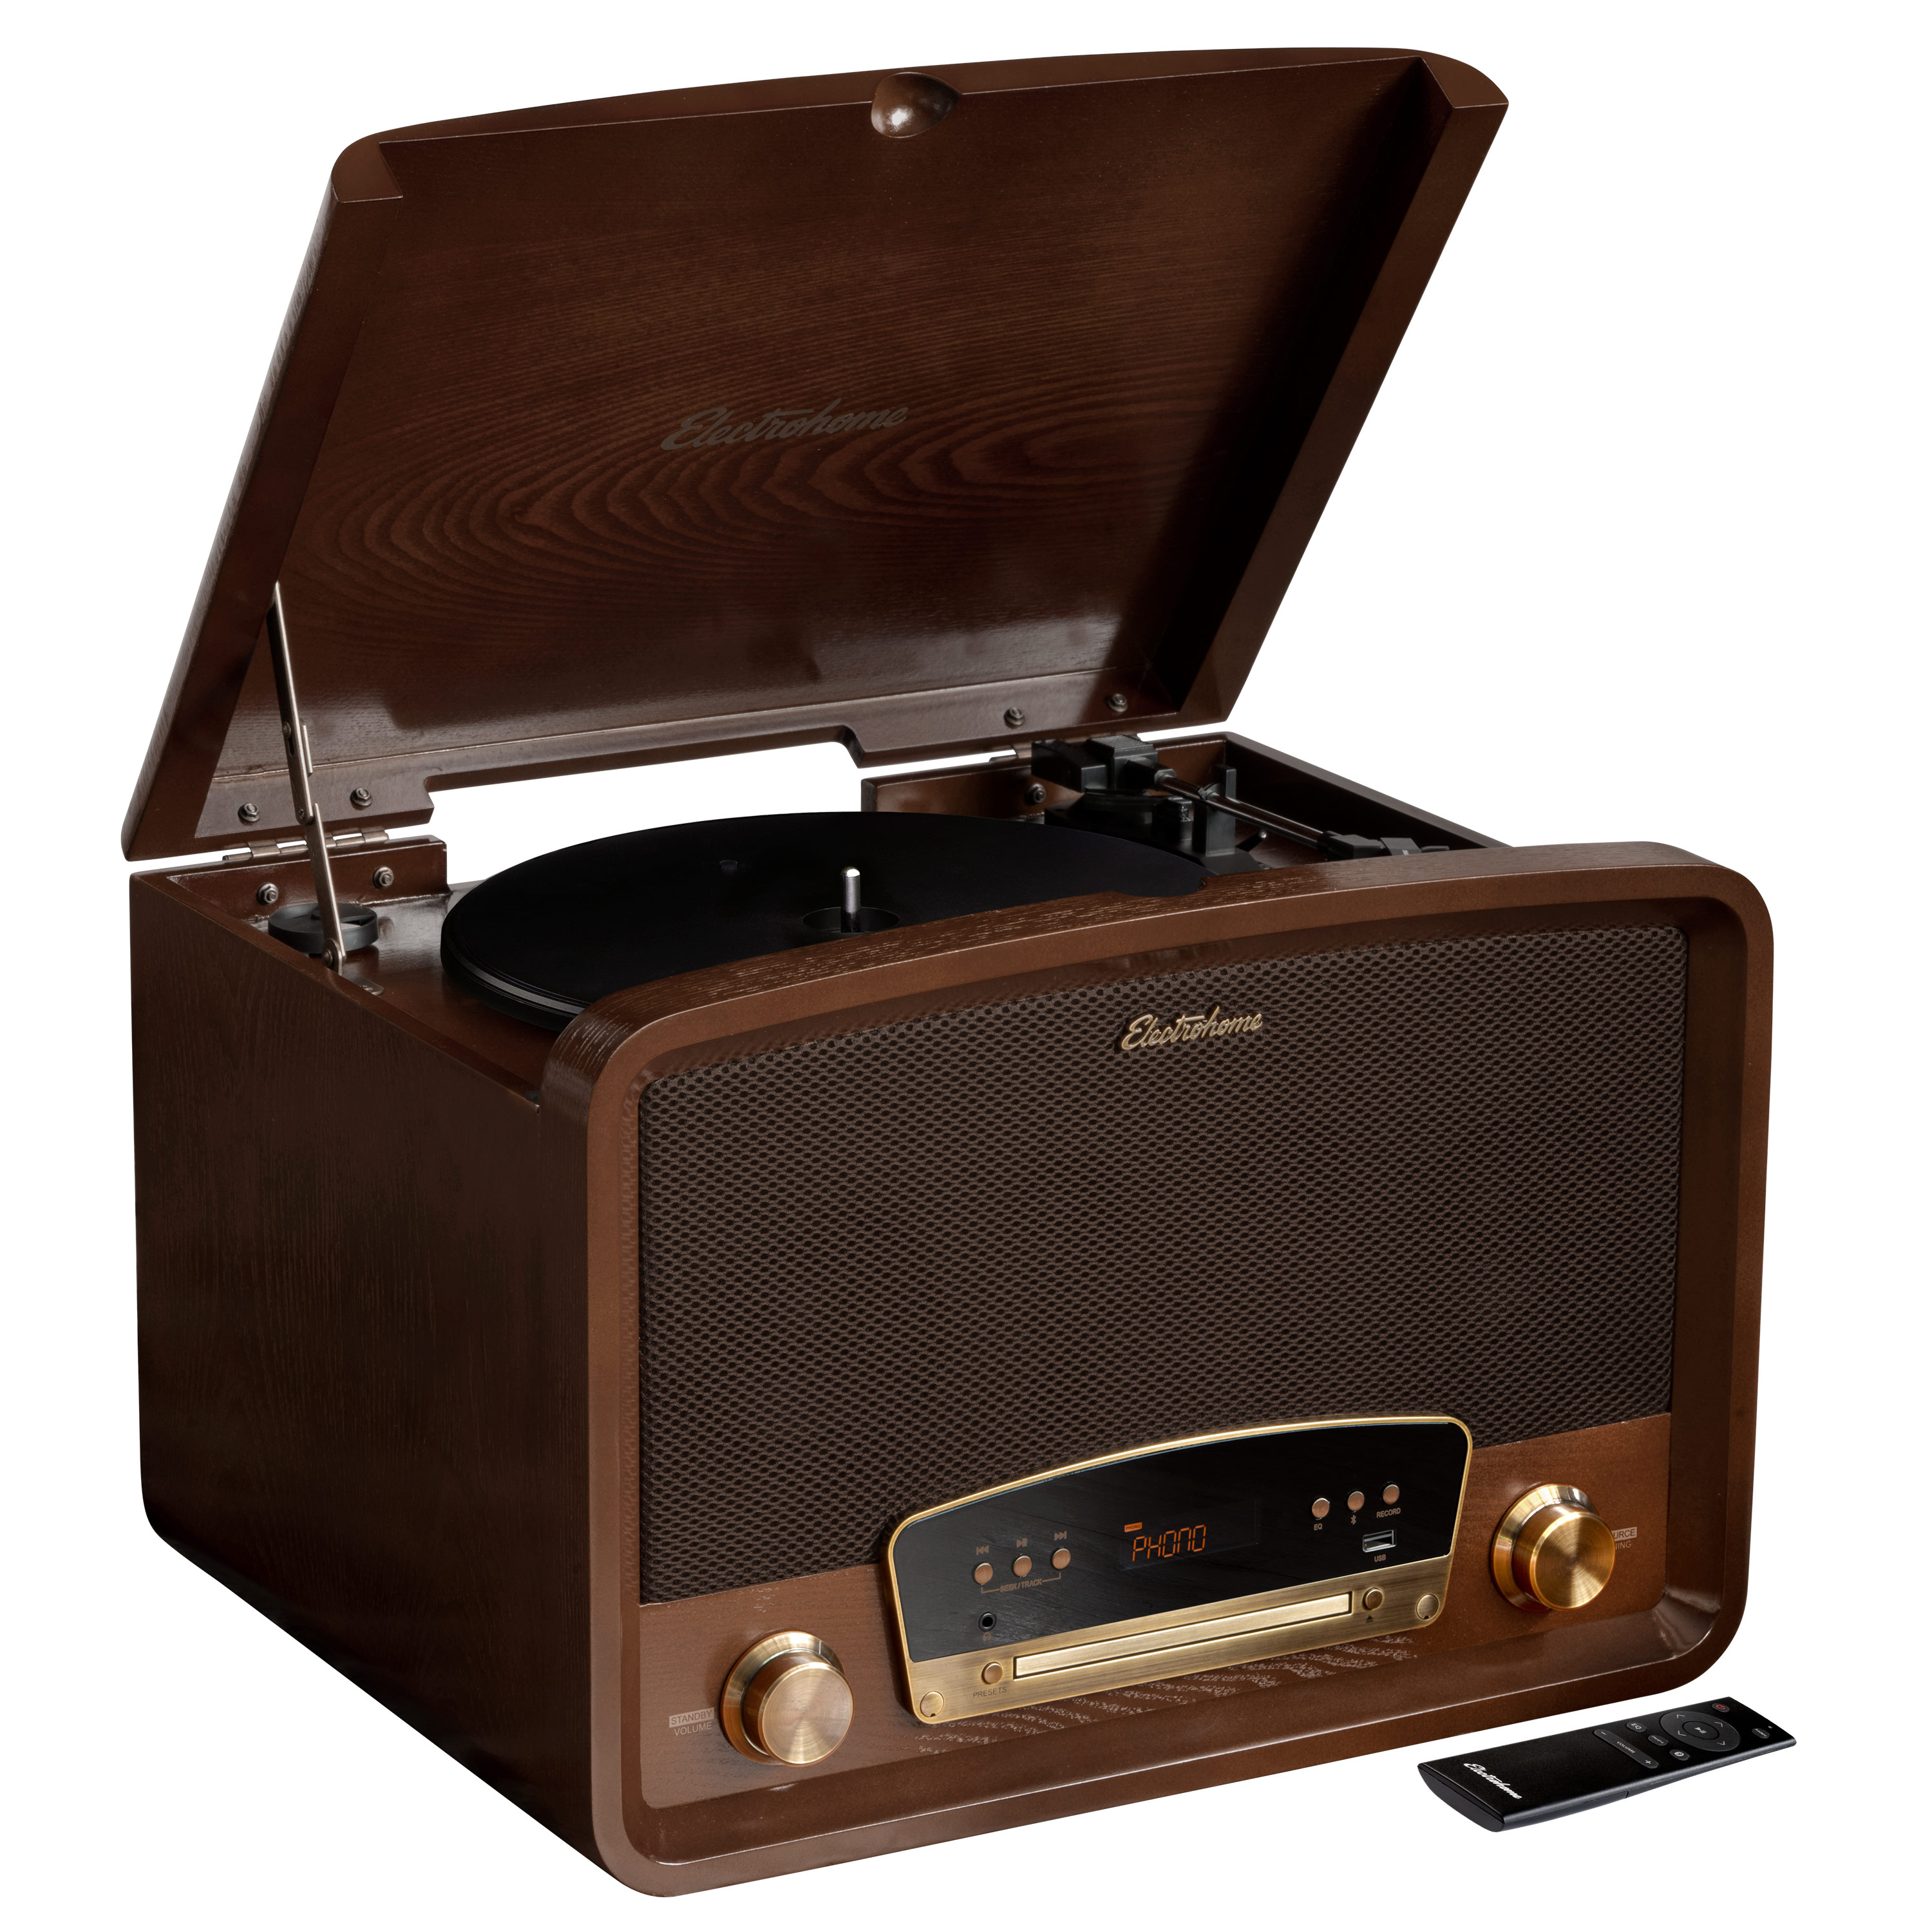 Electrohome Kingston 7-in-1 Vintage Vinyl Record Player Stereo System with 3-Speed Turntable, Bluetooth, AM/FM Radio, CD, Aux In, RCA/Headphone Out, Vinyl/CD to MP3 Recording & USB Playback (RR75) - image 1 of 9